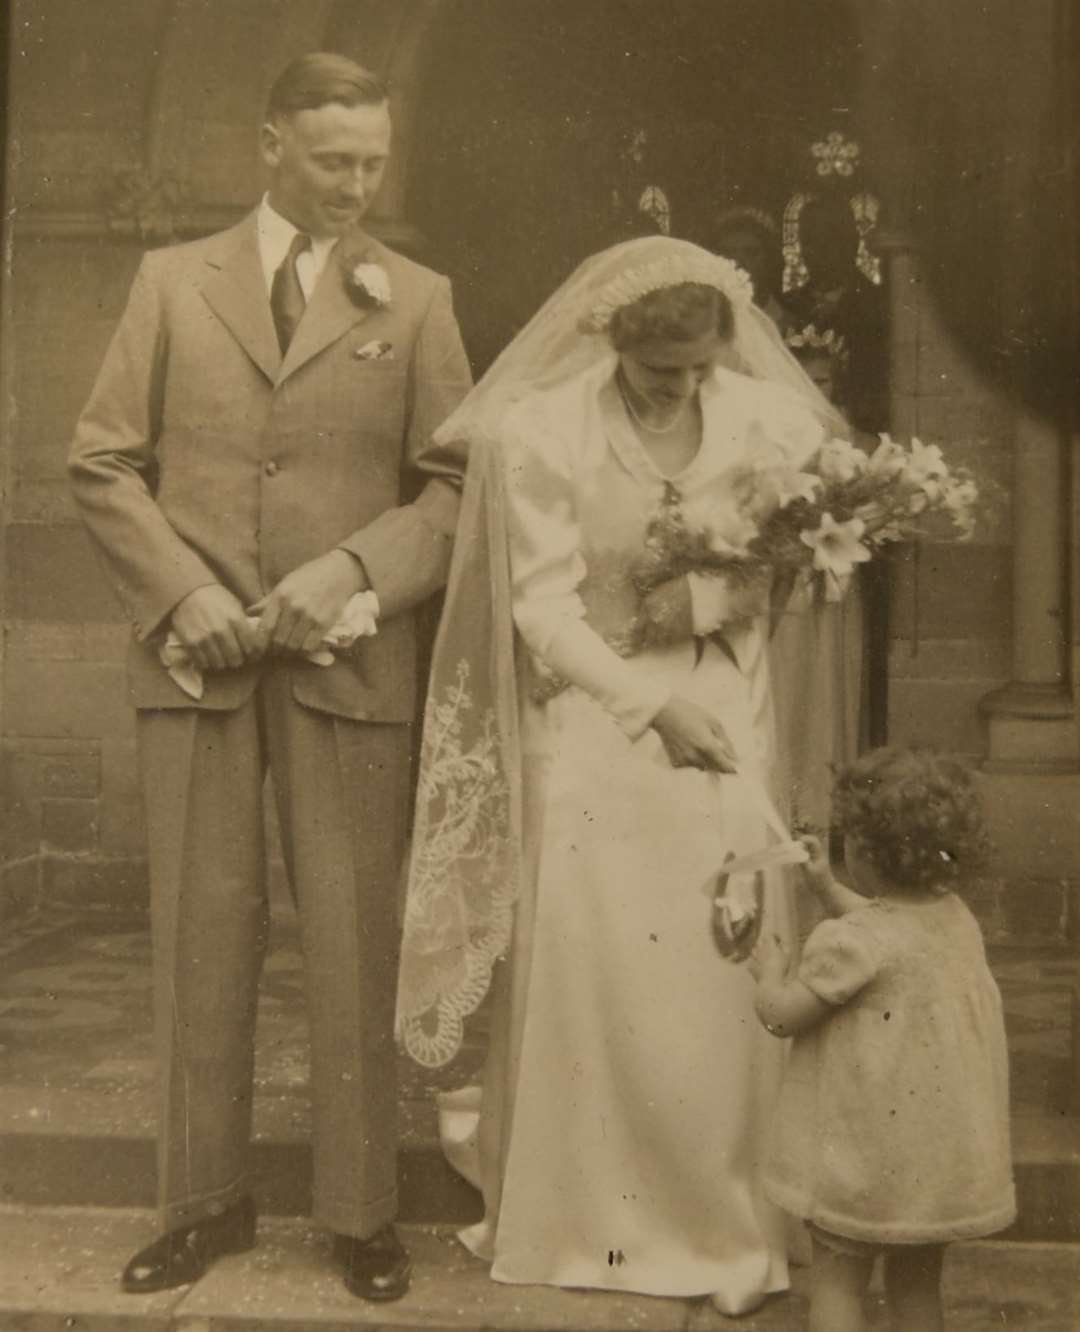 Julia and her husband William Carr on their wedding day, on April 18, 1938